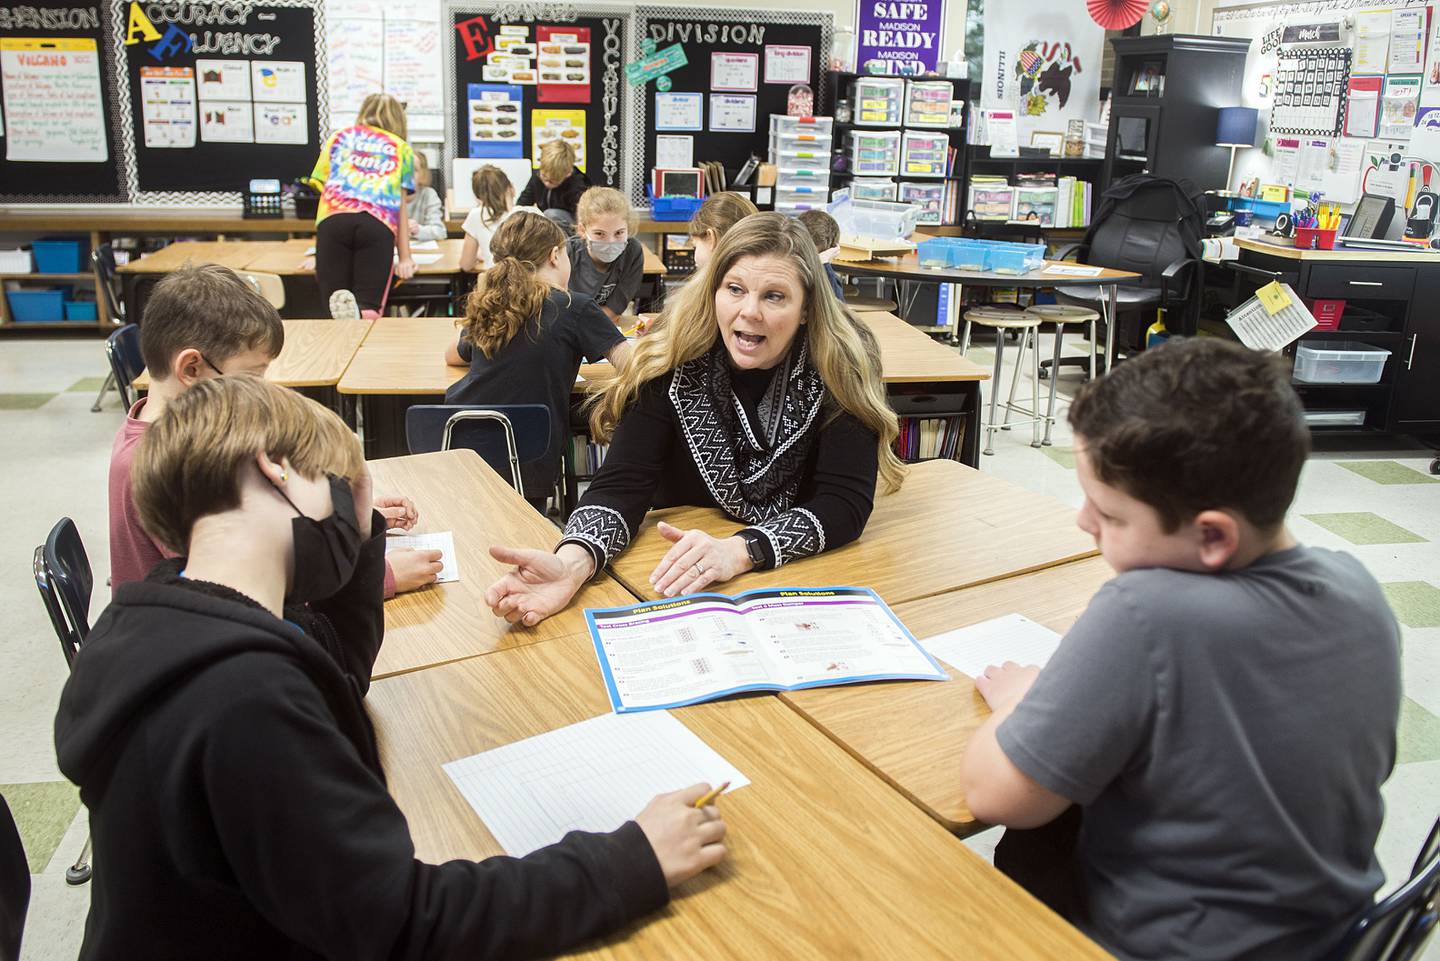 Madison School fourth grade teacher Kim Bork leads her class in an assignment at the Dixon school.  Bork is the president of of the Sauk Valley Reading council and has been named the Sauk Valley Media and KSB Hospital's Dixon Amazing Teacher in 2020 and received the Family Literacy Award in 2021.